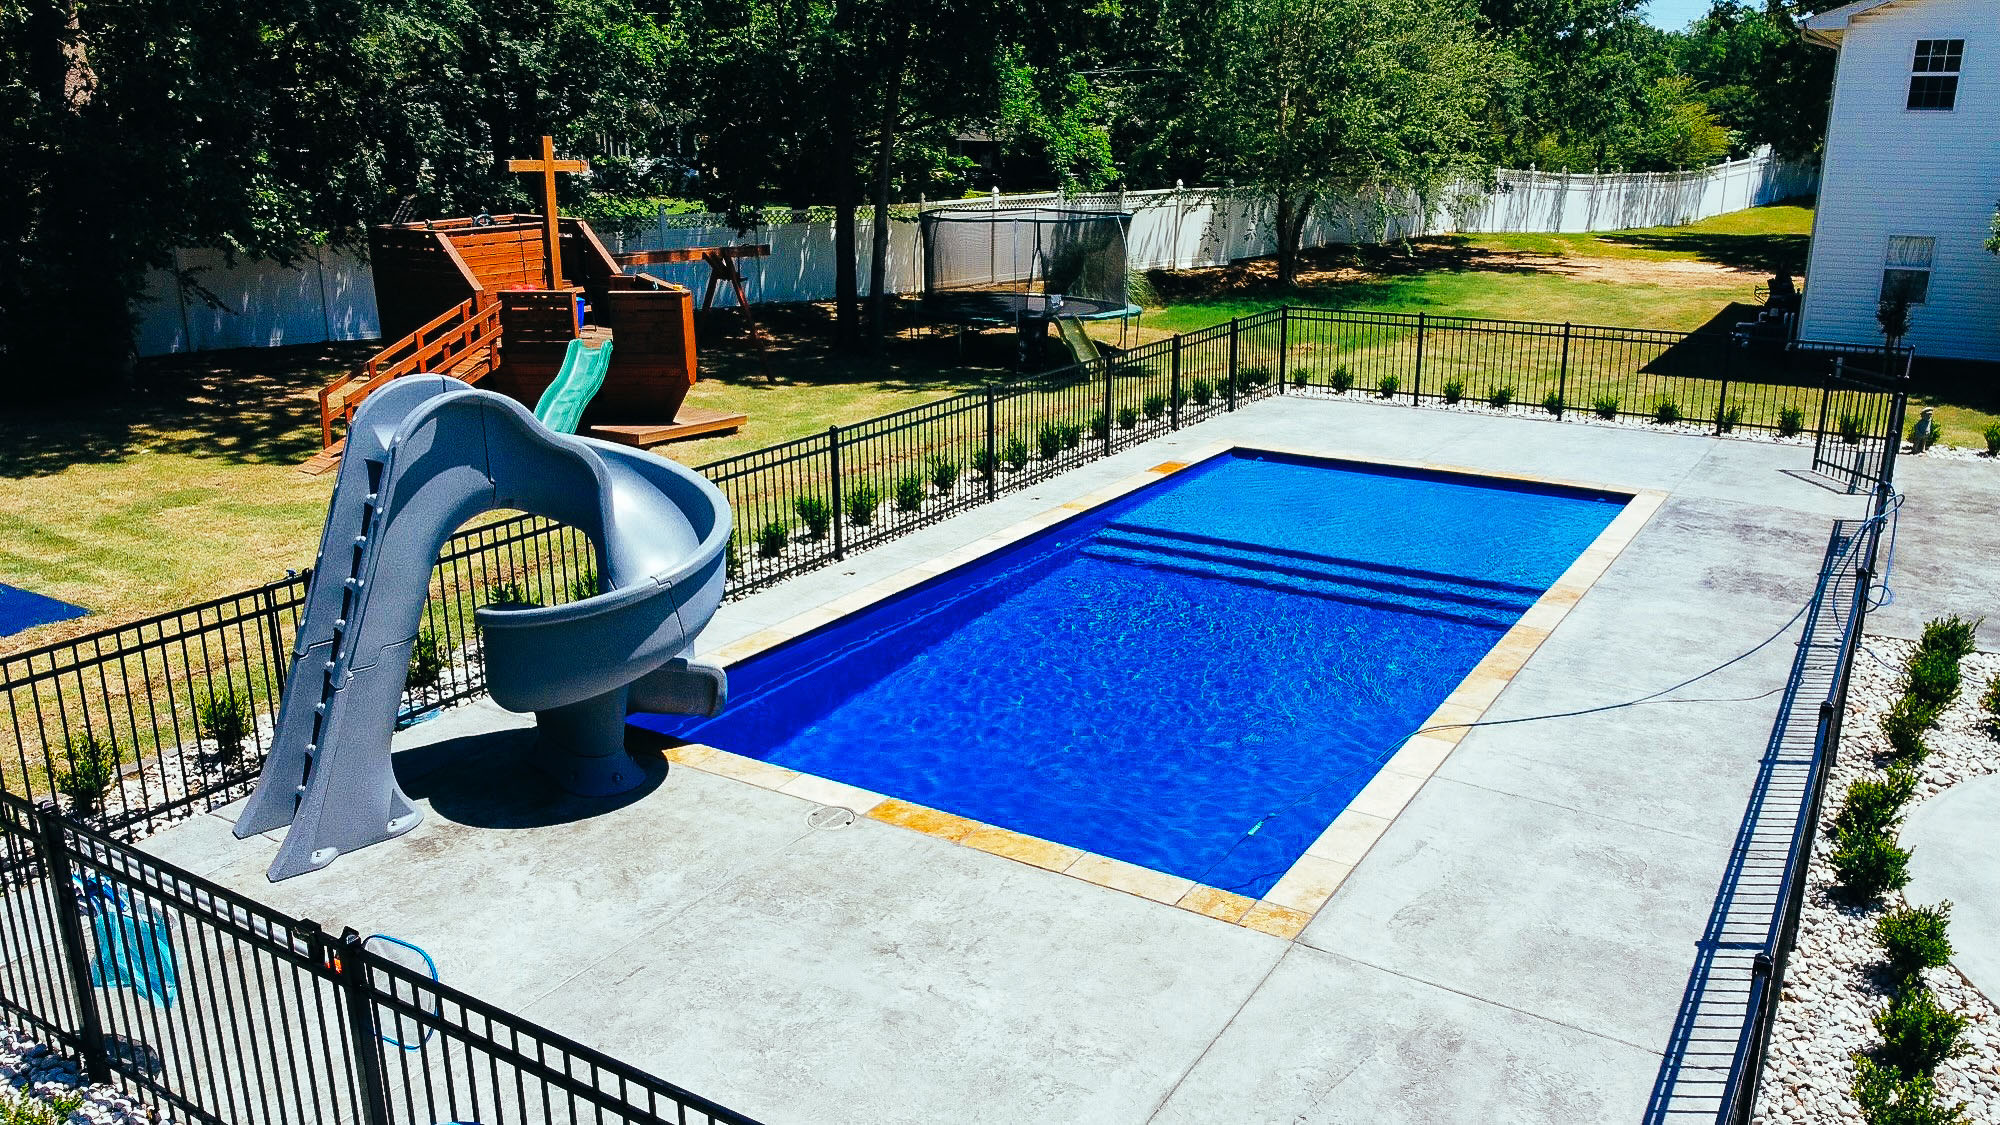 Laguna Fiberglass Pools San Antonio manufactured and installed by Lonestar Pool of New Braunfels salted concrete slide and safety fence